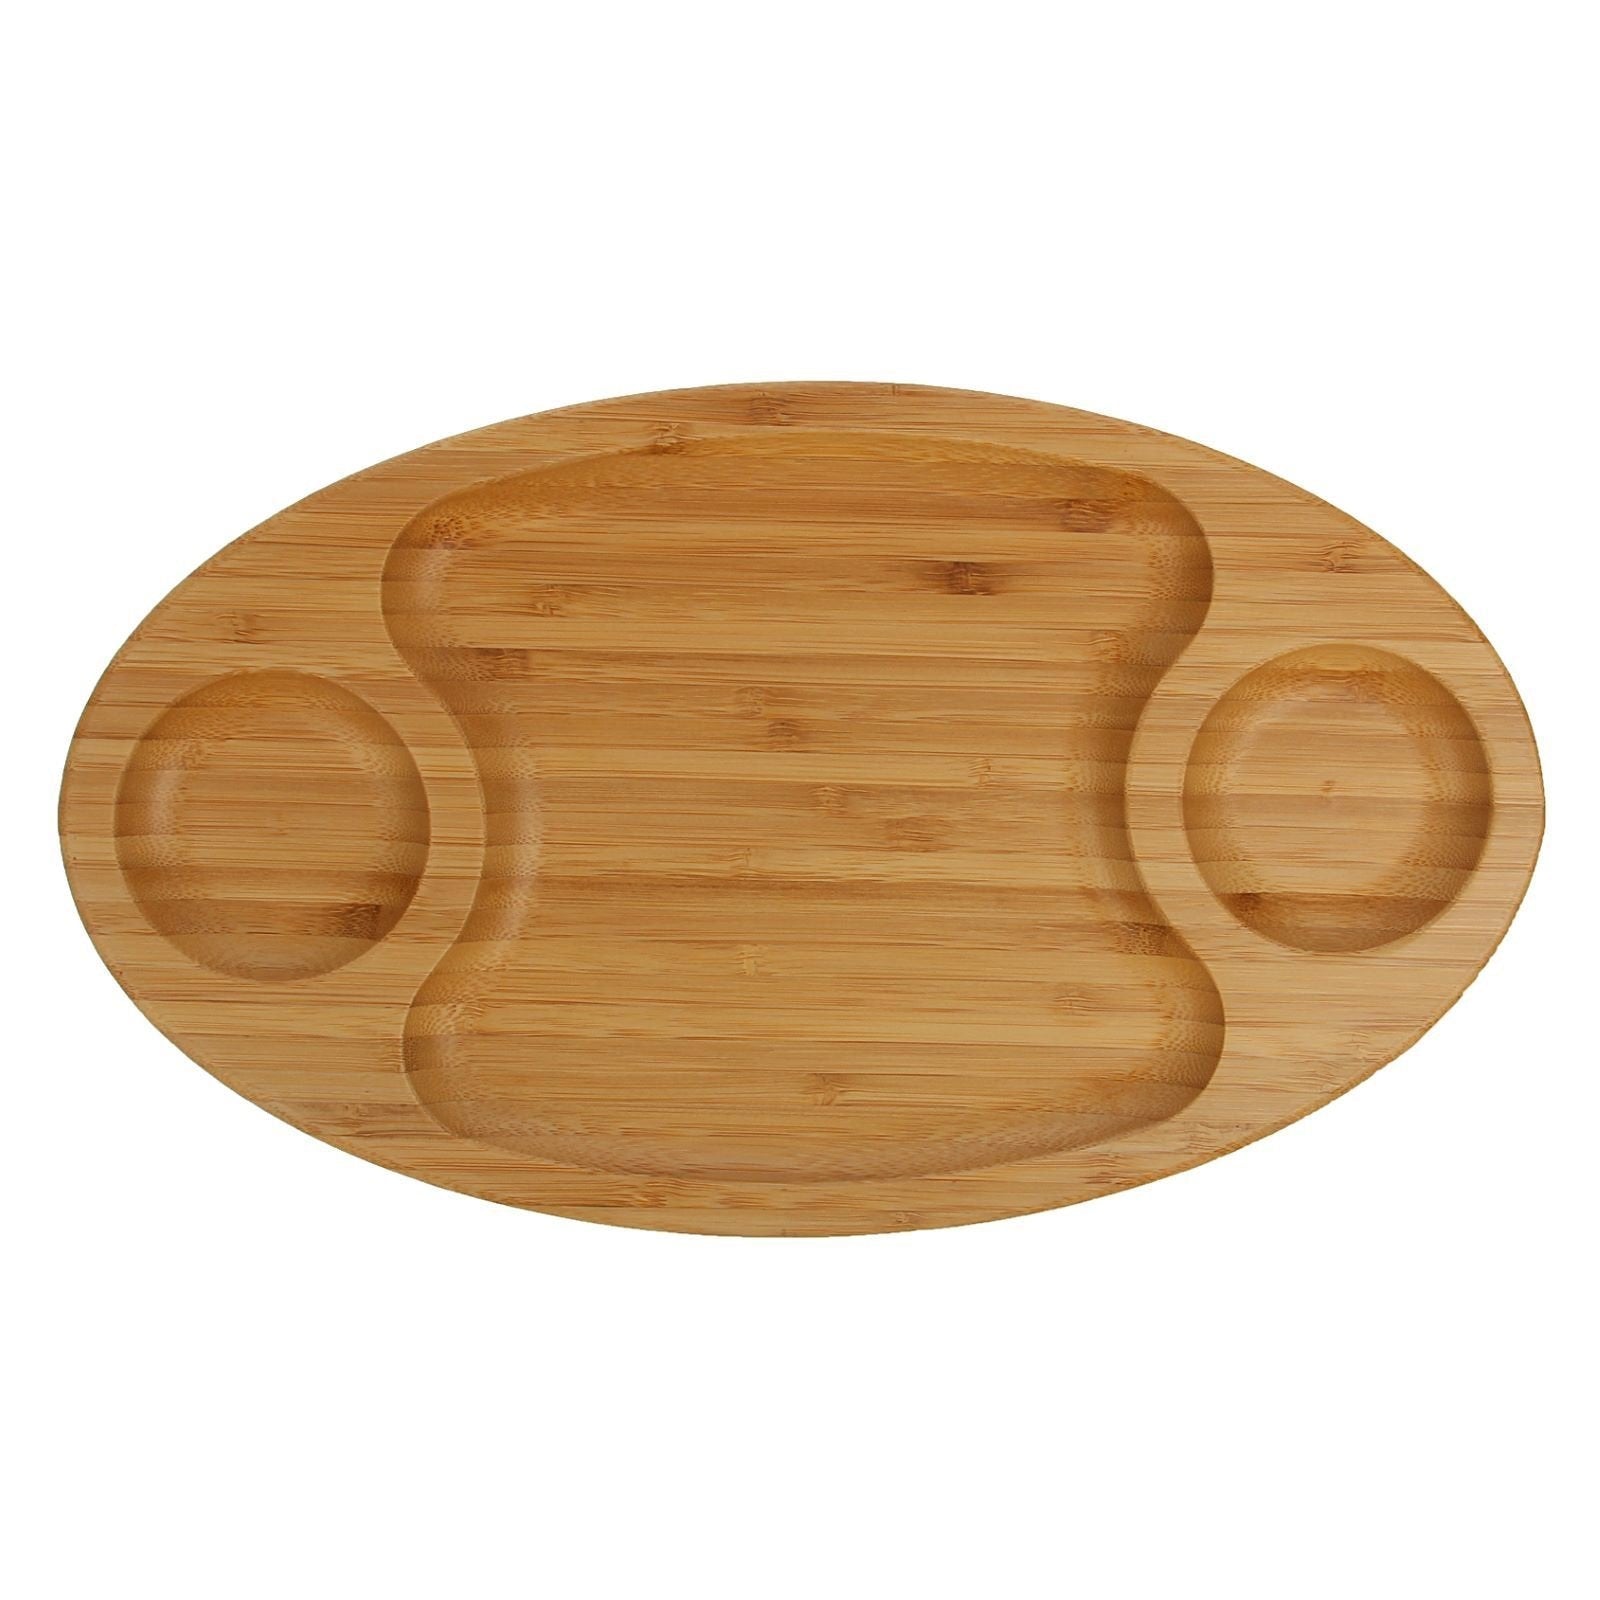 Bamboo 3 Section Platter 14" inch X 8" inch -1